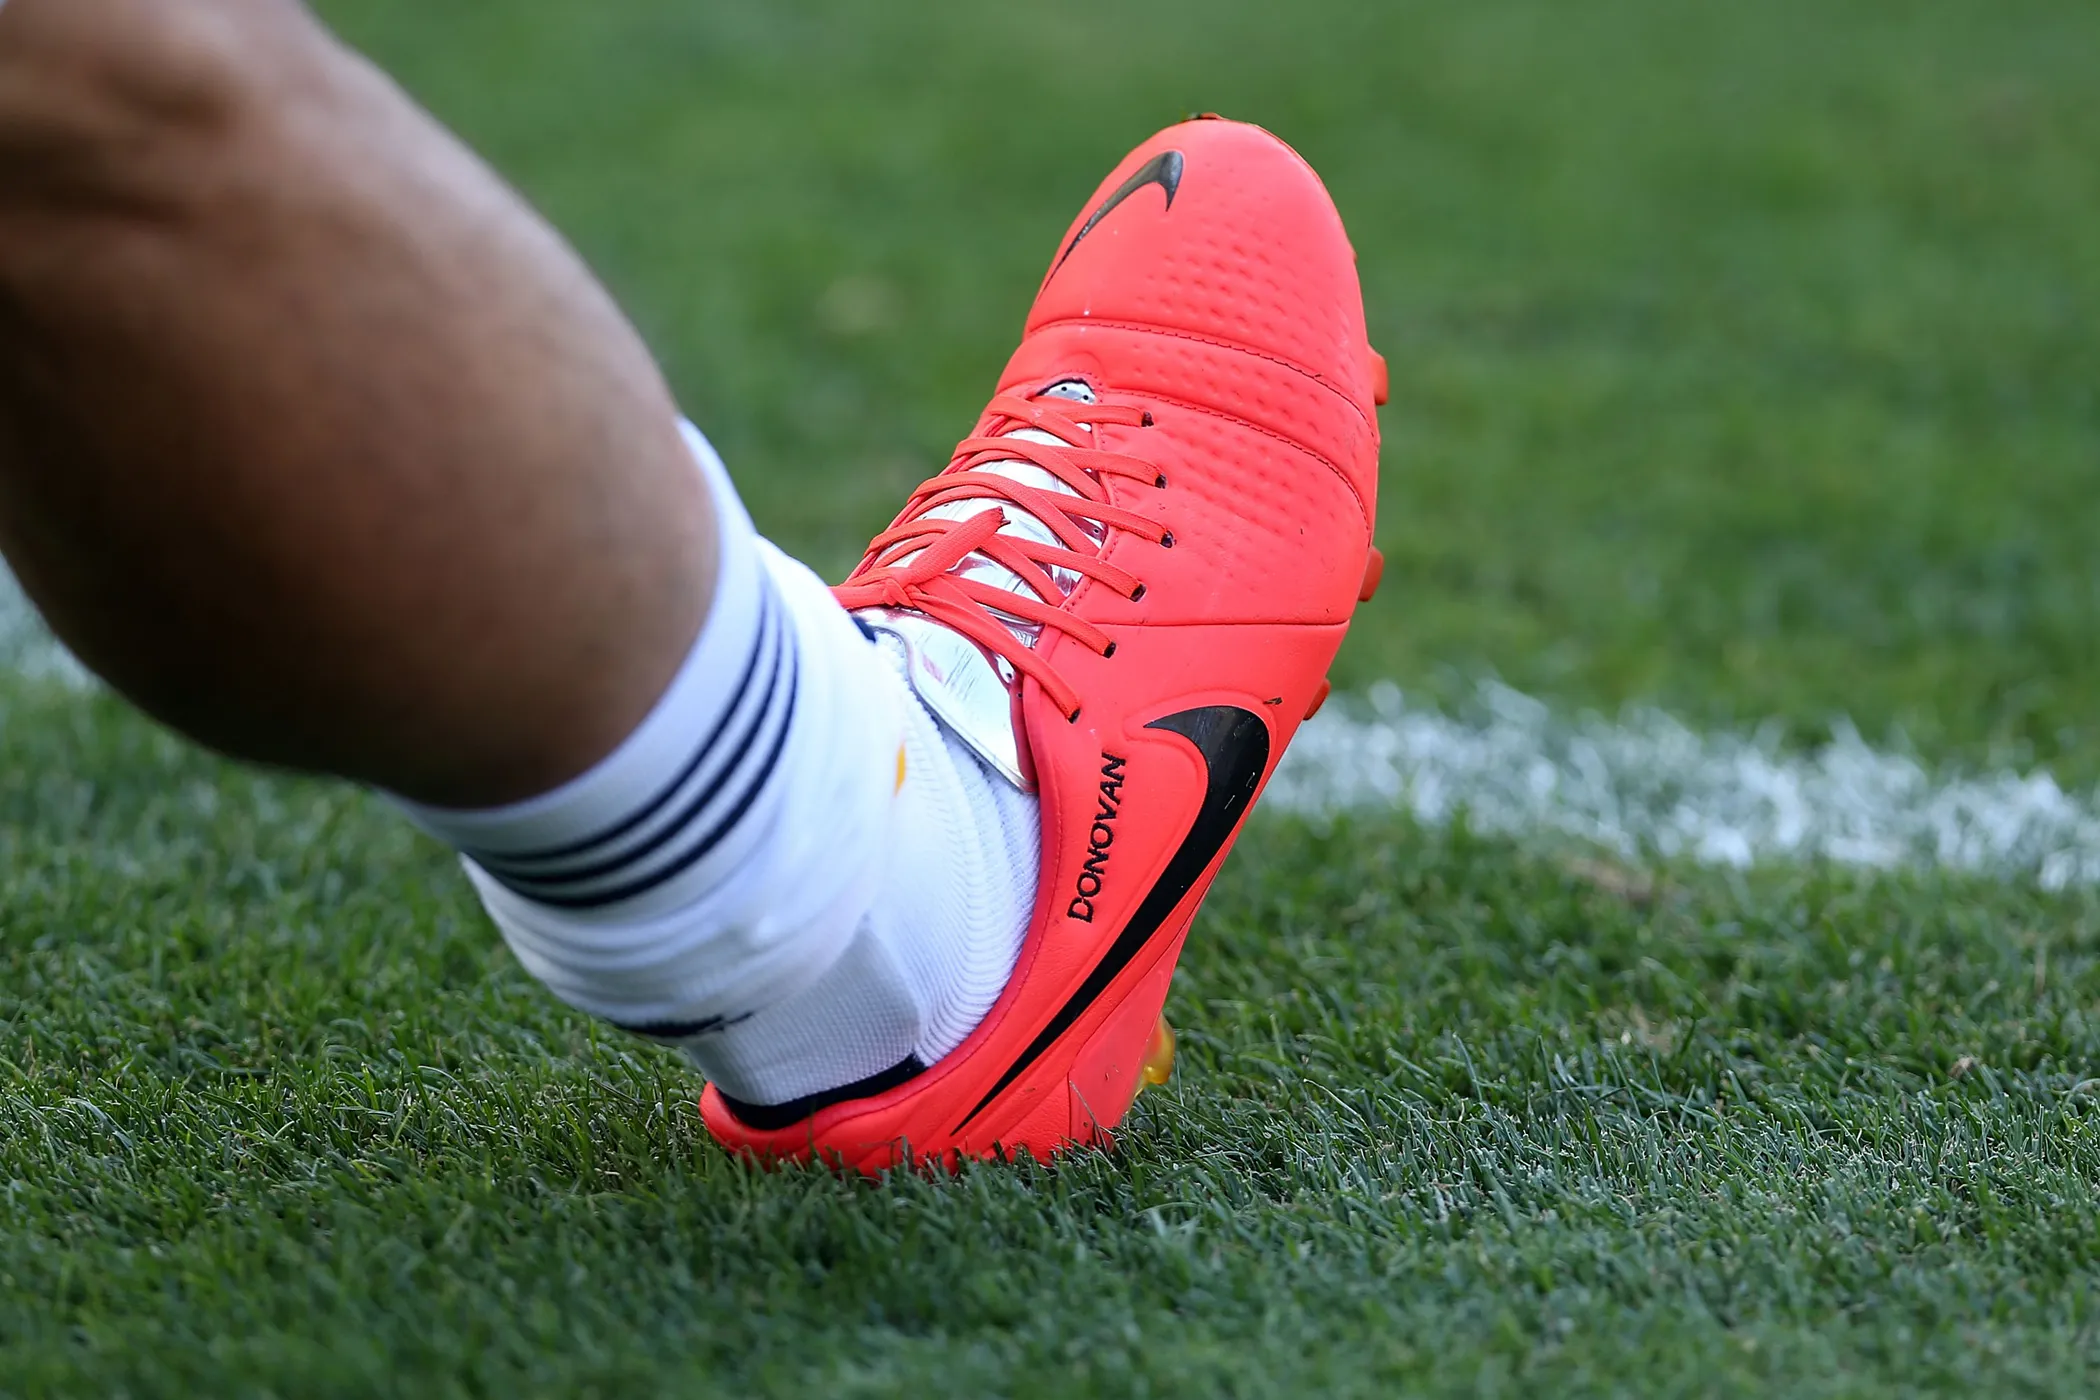 Shares of Nike and Adidas could score at the World Cup